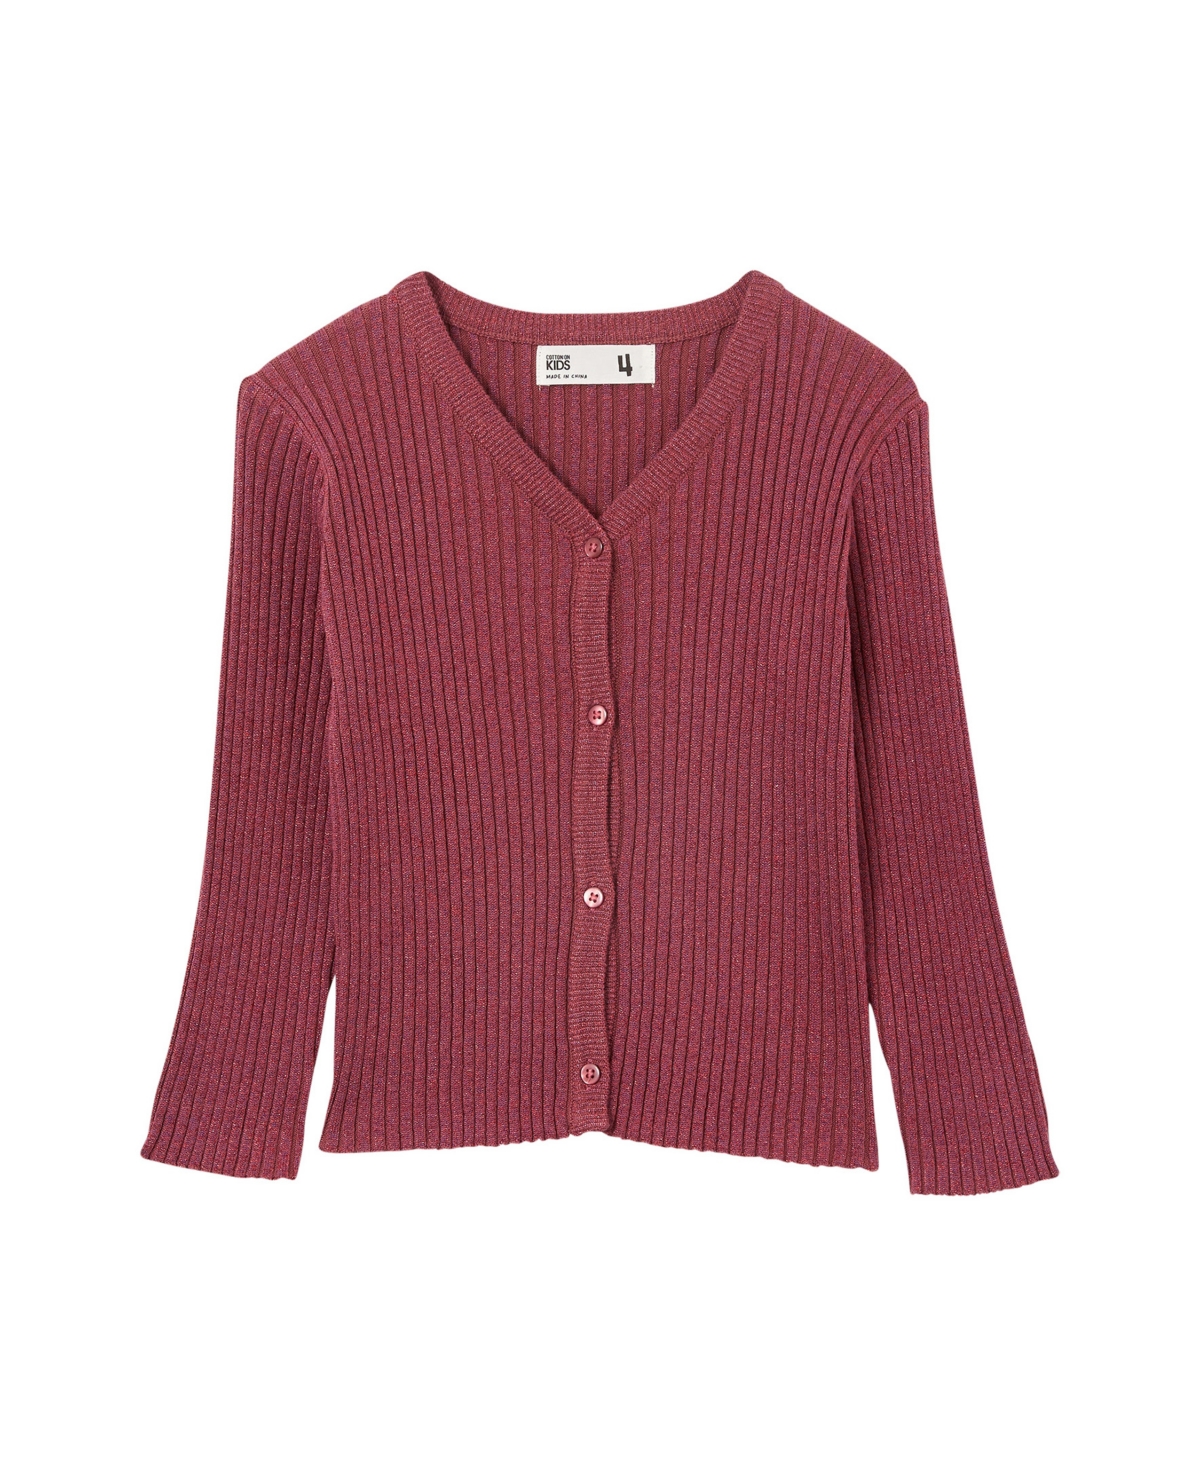 Cotton On Kids' Big Girls Molly Cardigan Sweater In Vintage Berry Sparkle